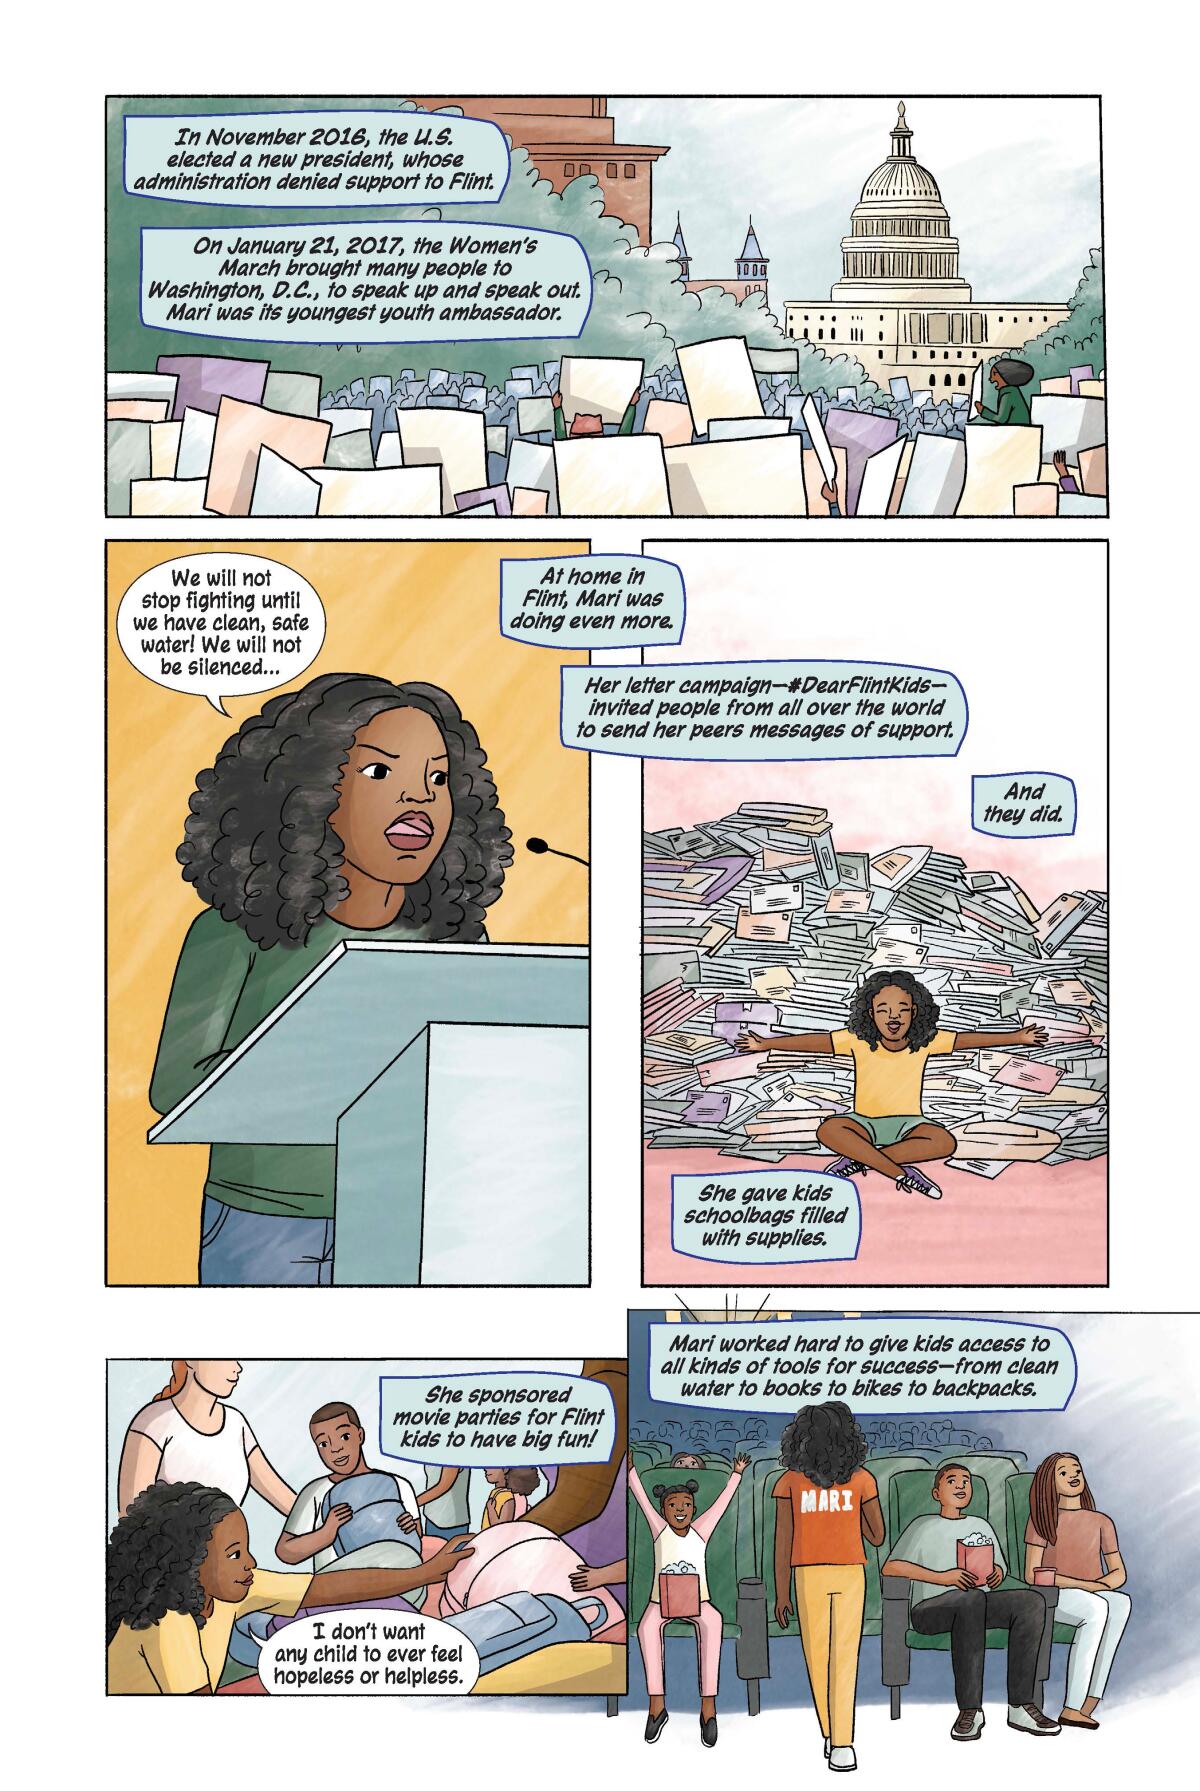 Comic book illustrations of the U.S. Capitol and a young Black woman speaking at a lectern